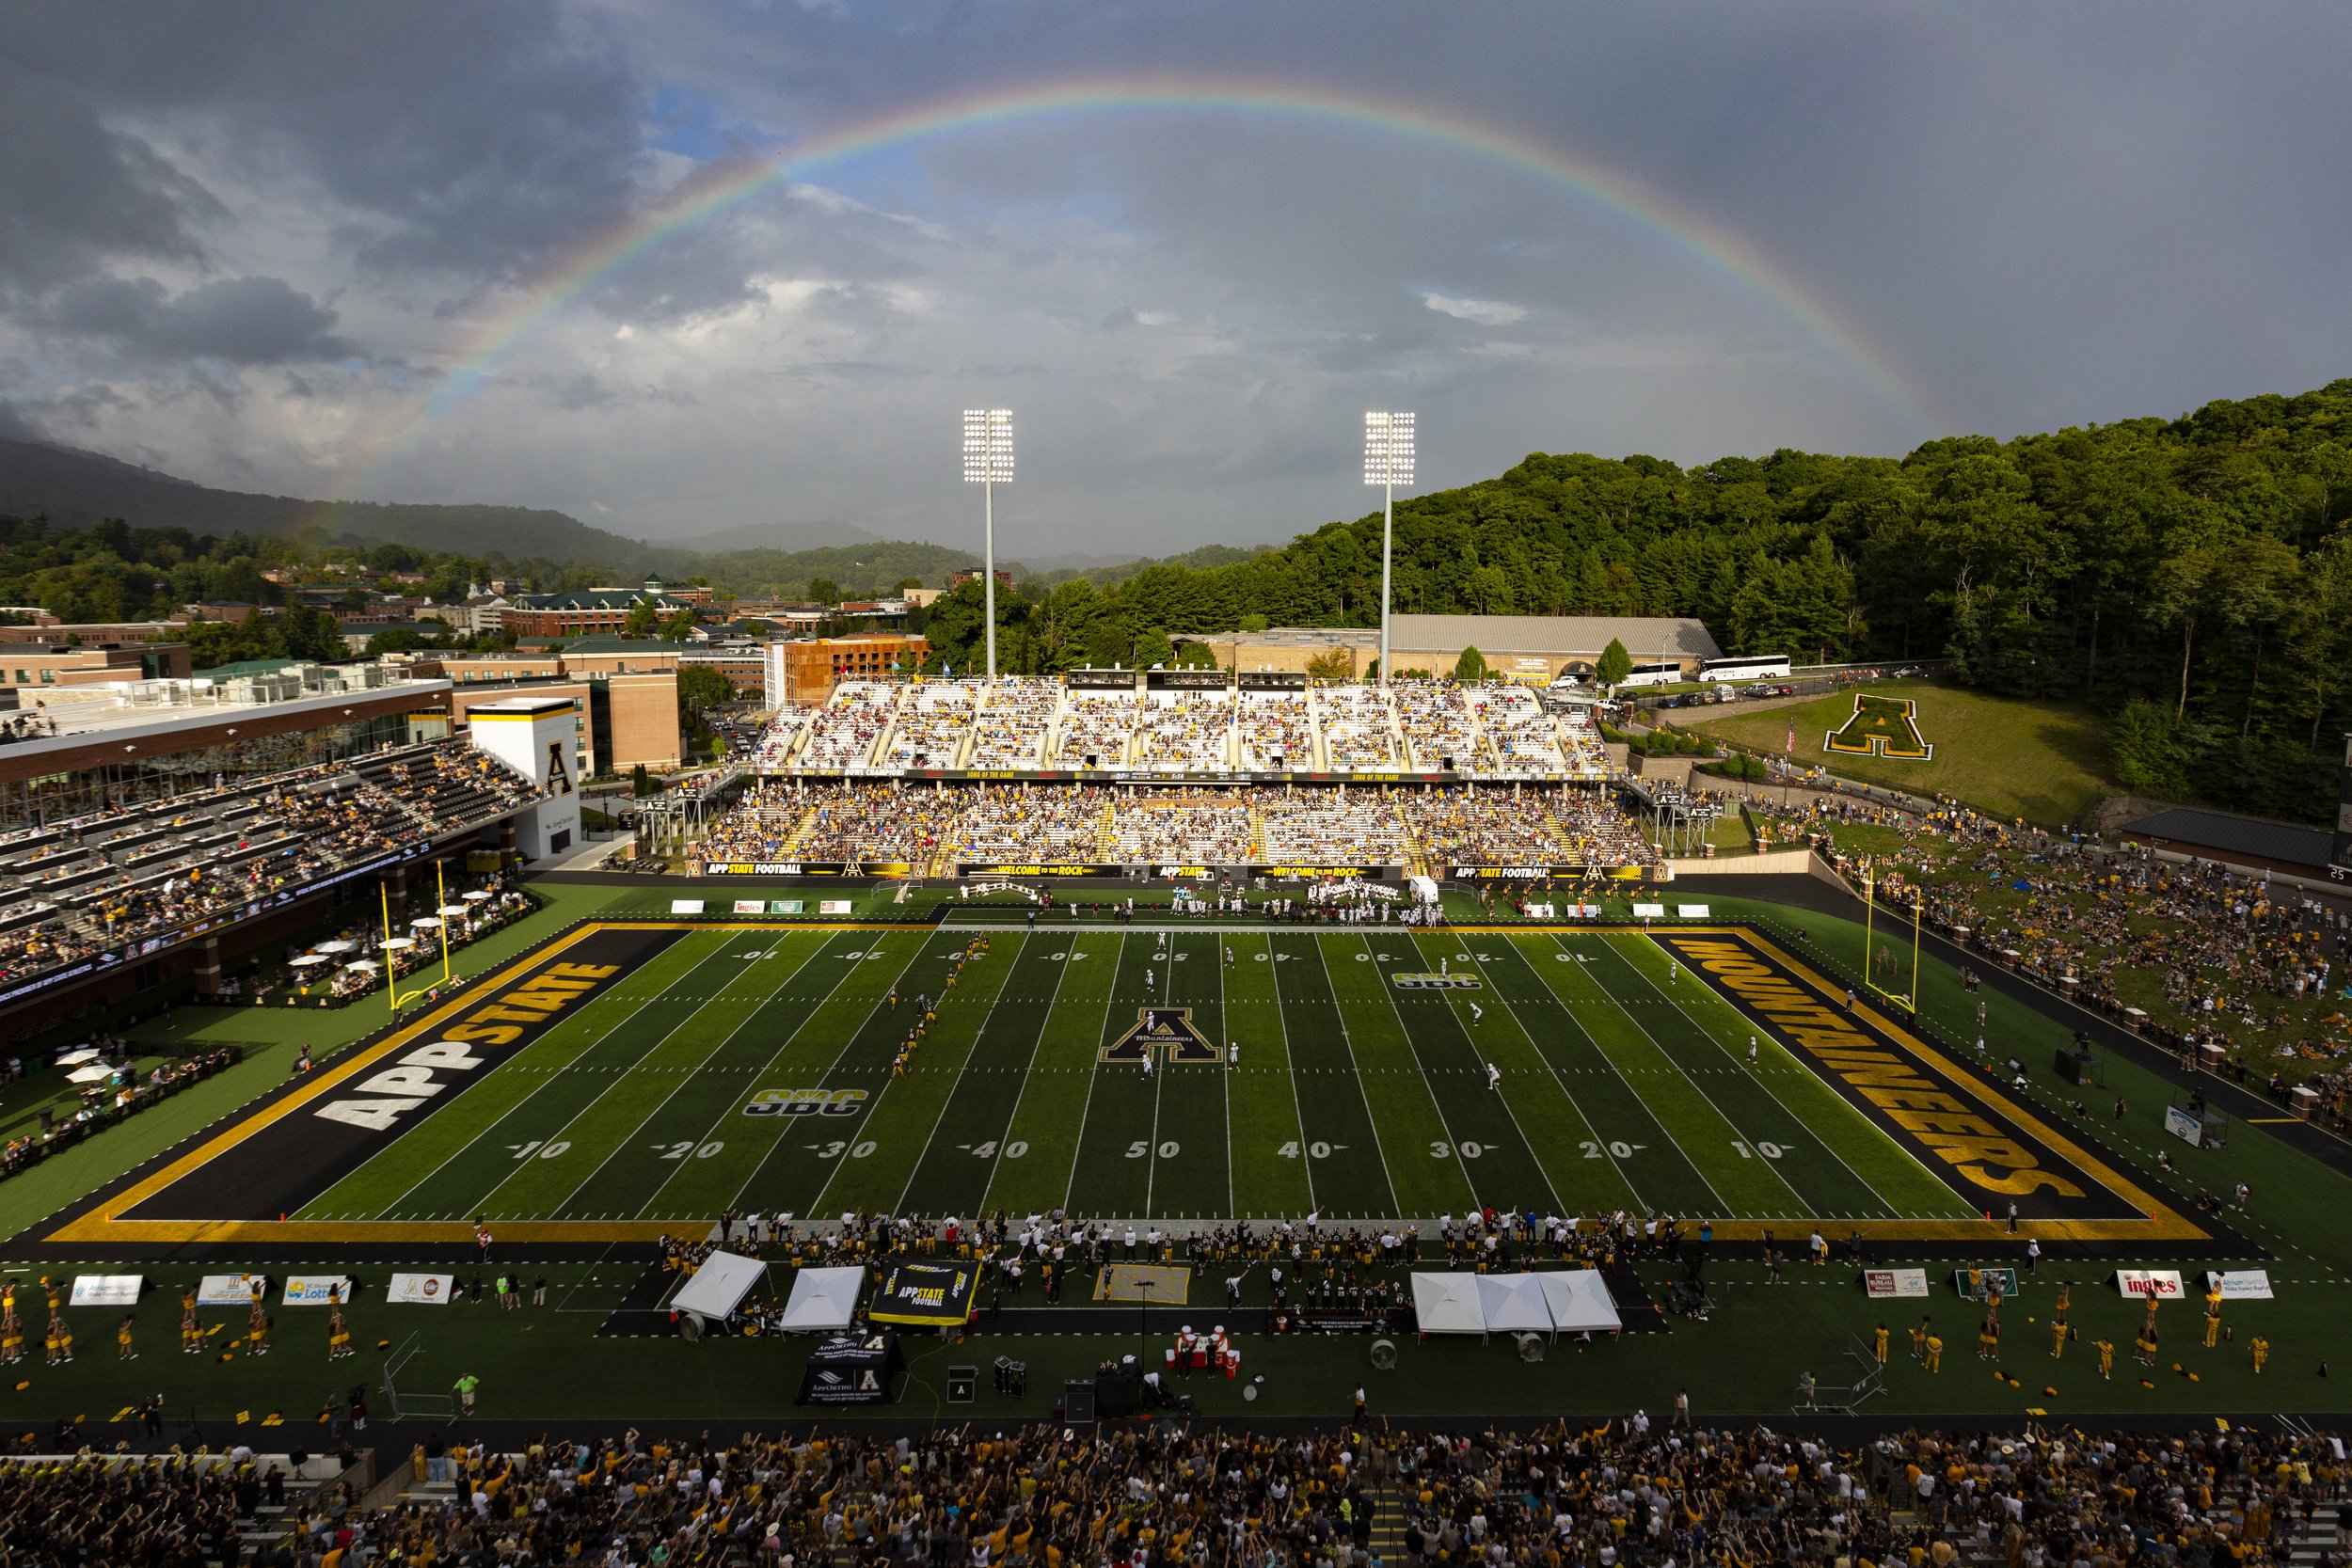  A rainbow appears over Kidd Brewer Stadium as Appalachian State takes on Elon University during the third quarter in Boone, N.C., on Saturday, September 18, 2021.  